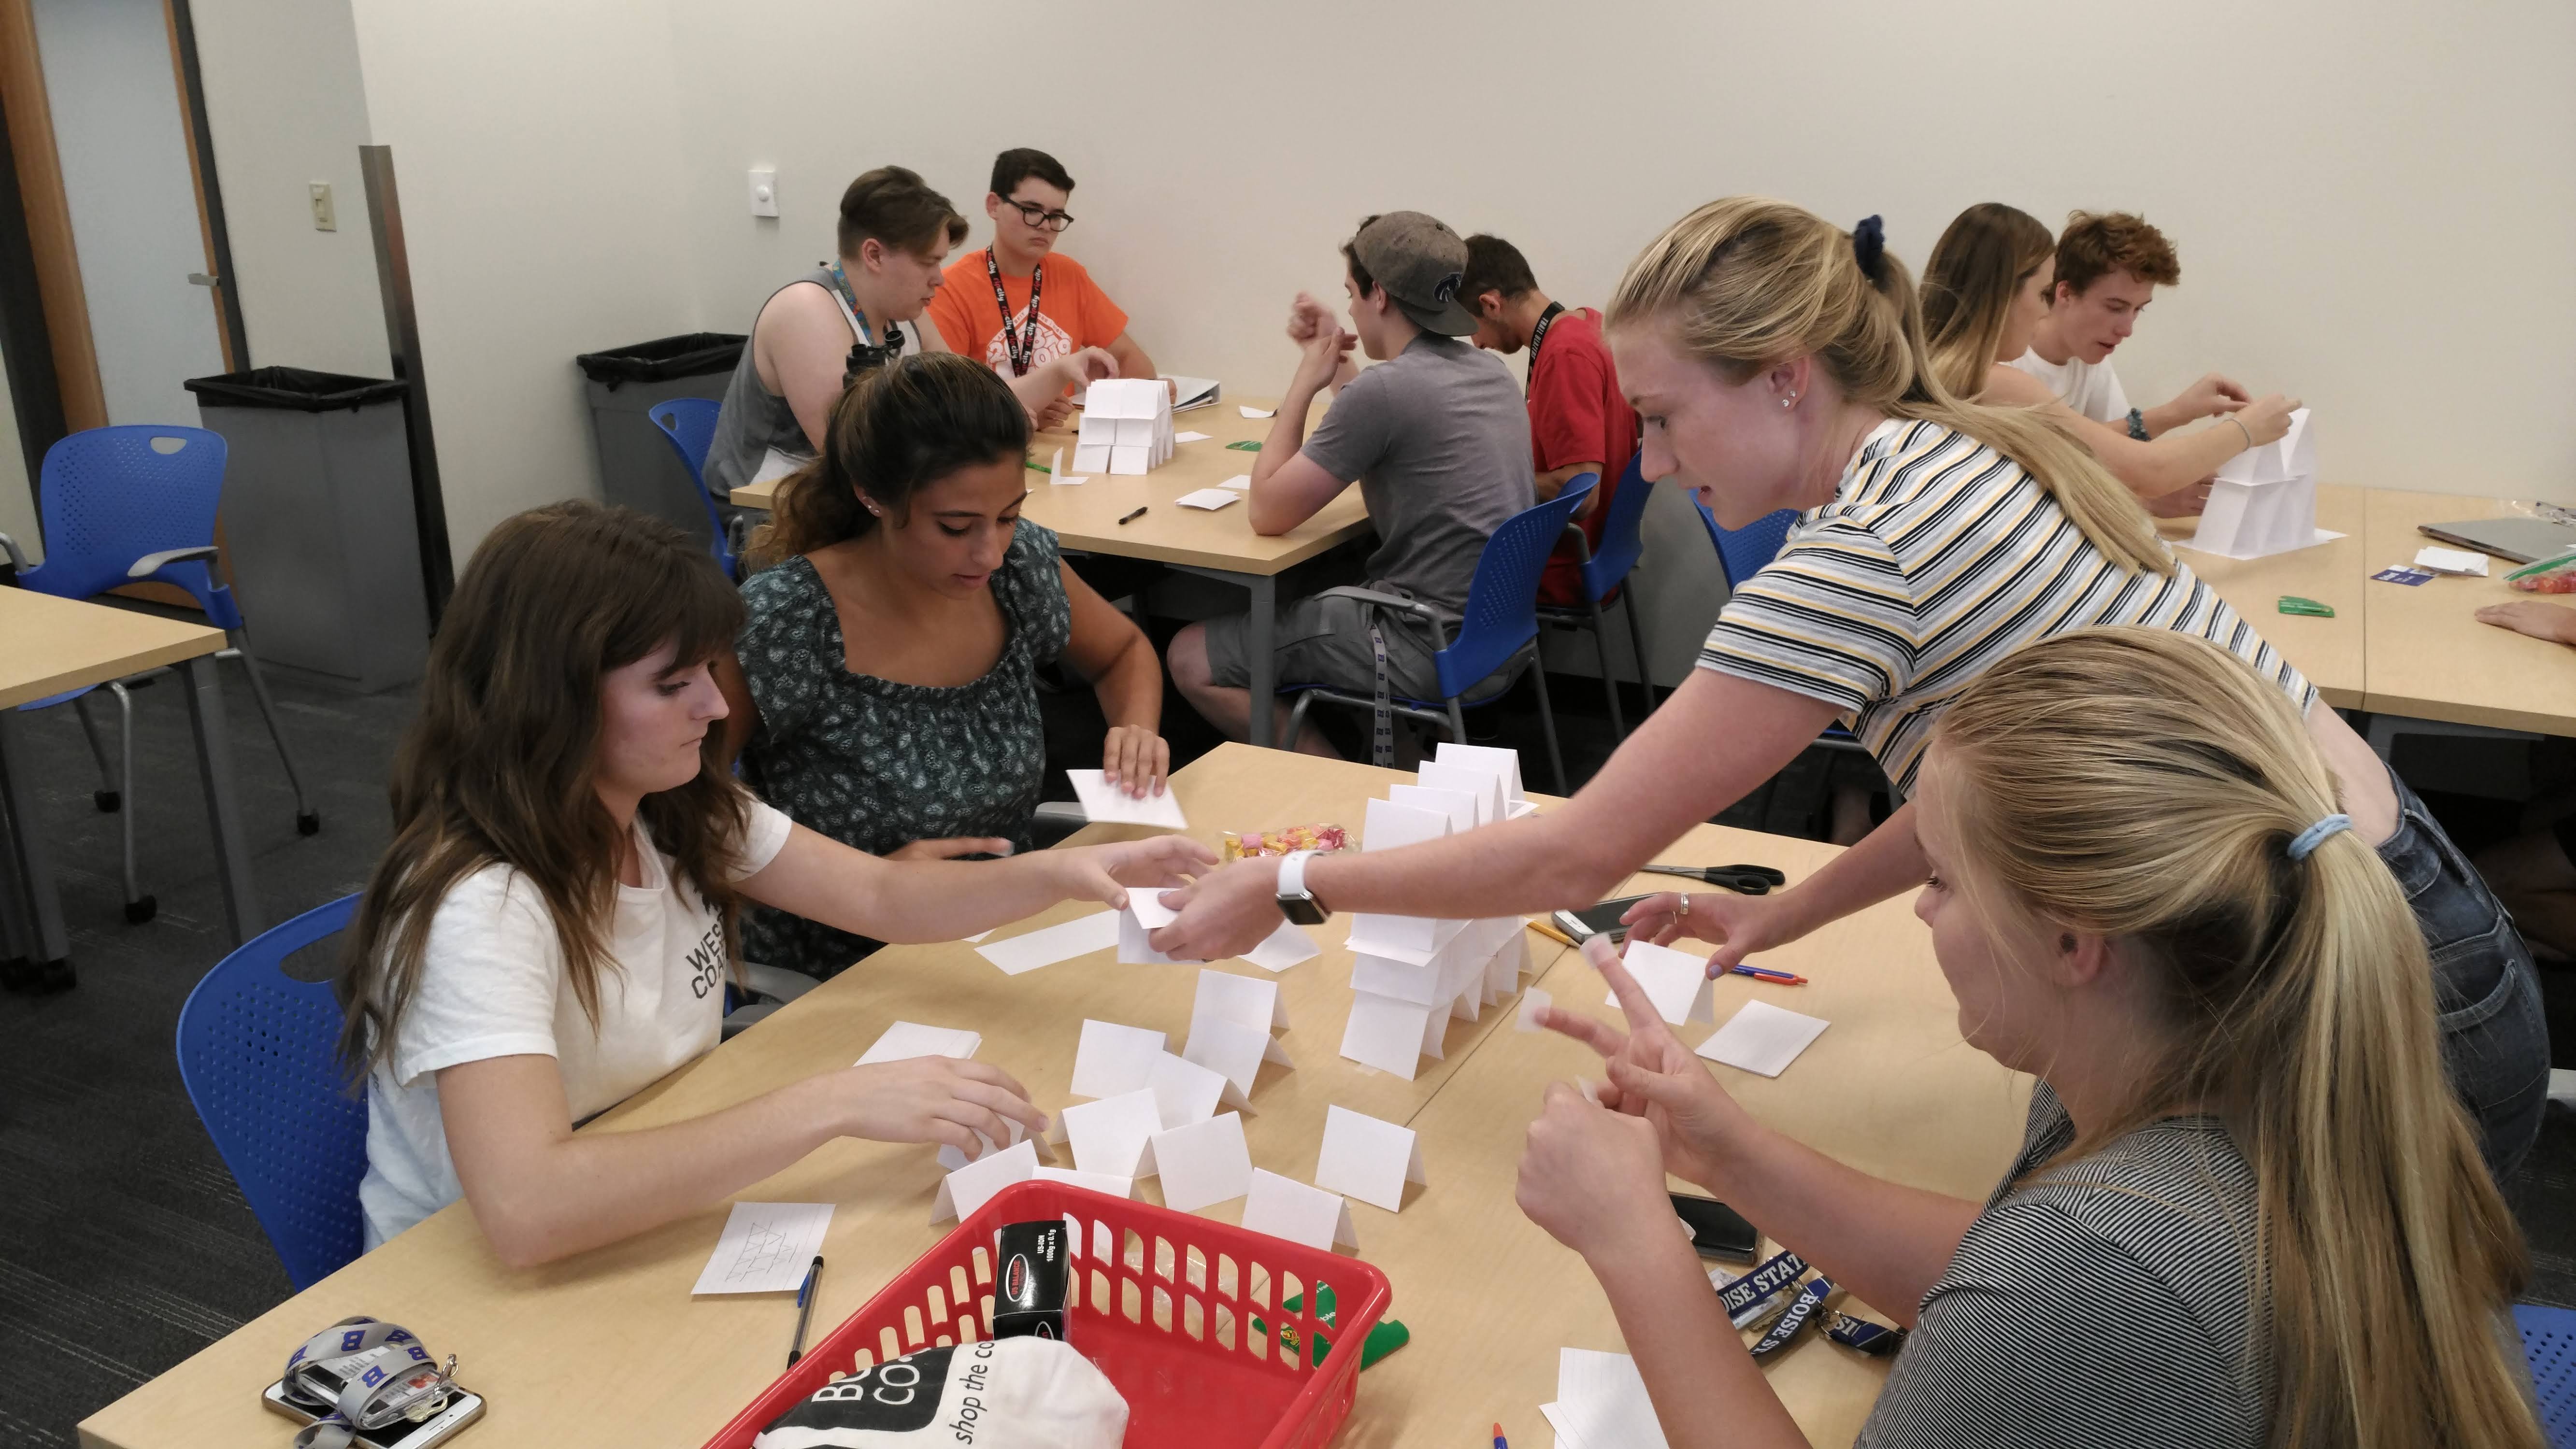 participants work together to create paper towers